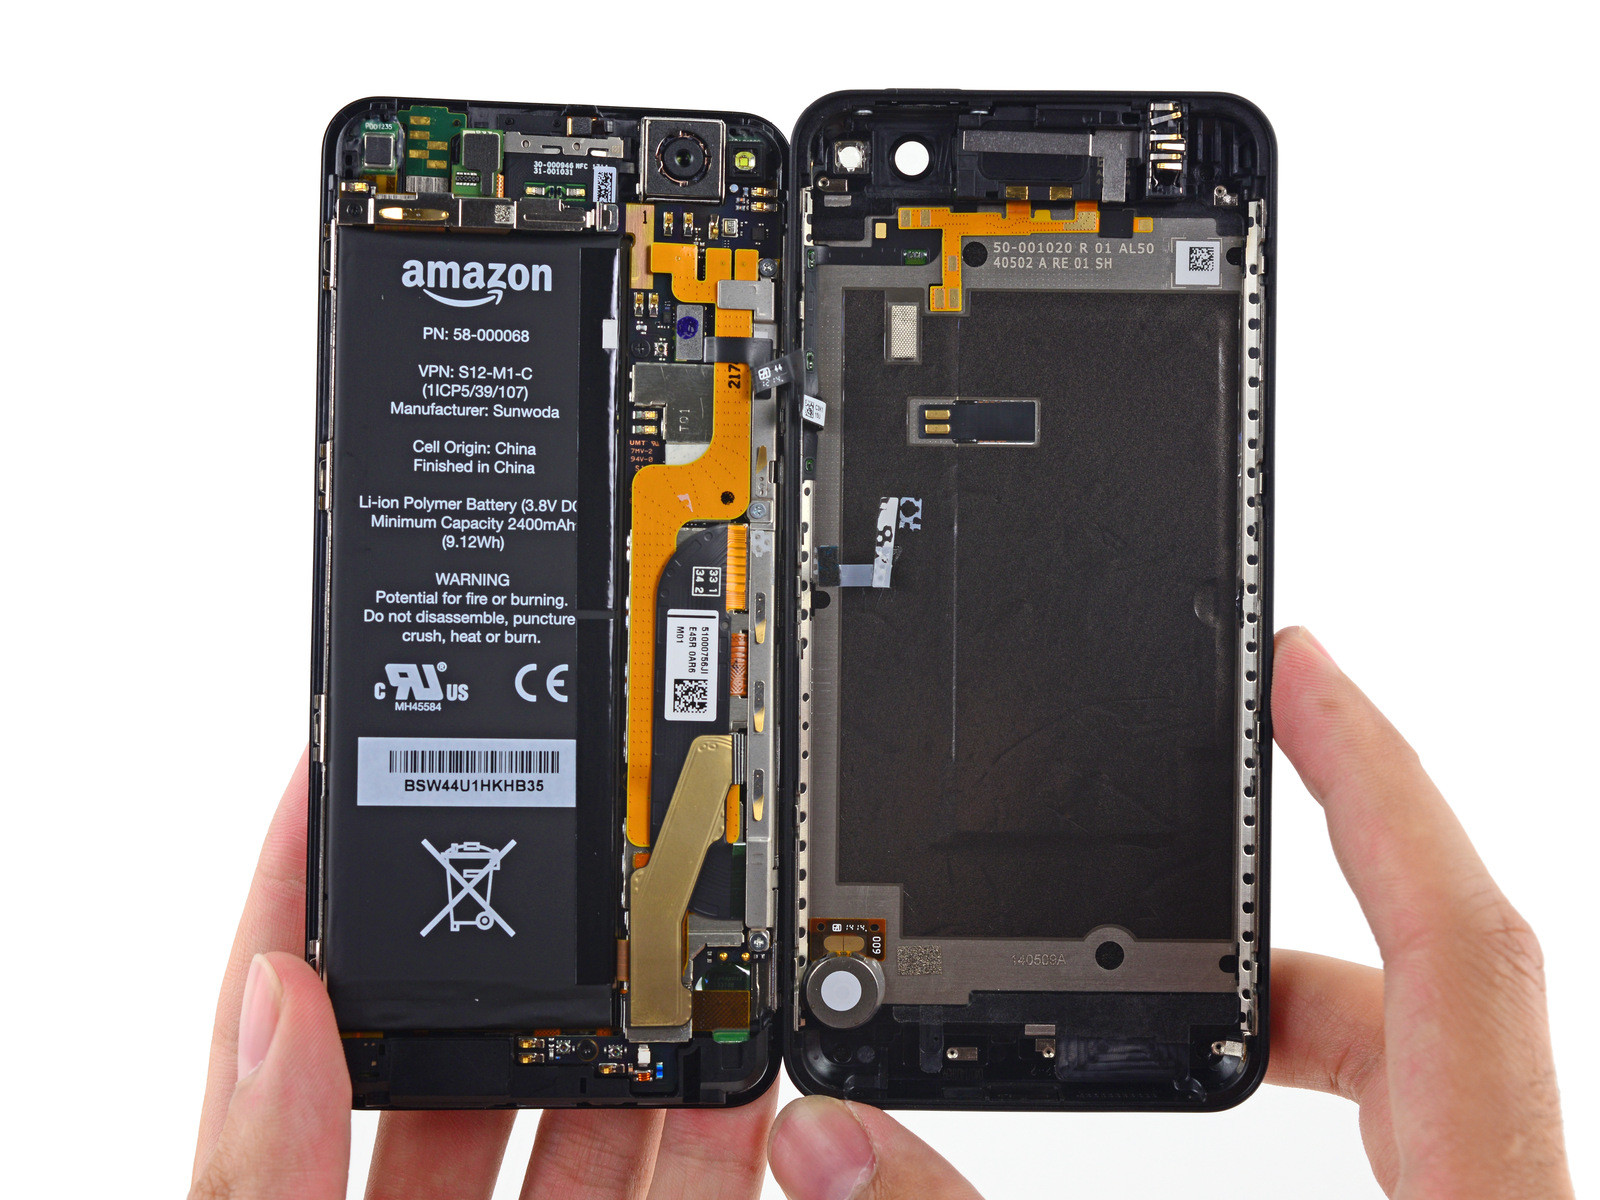 Amazon Fire Phone Teardown: So Many Cameras In Such A Small Space